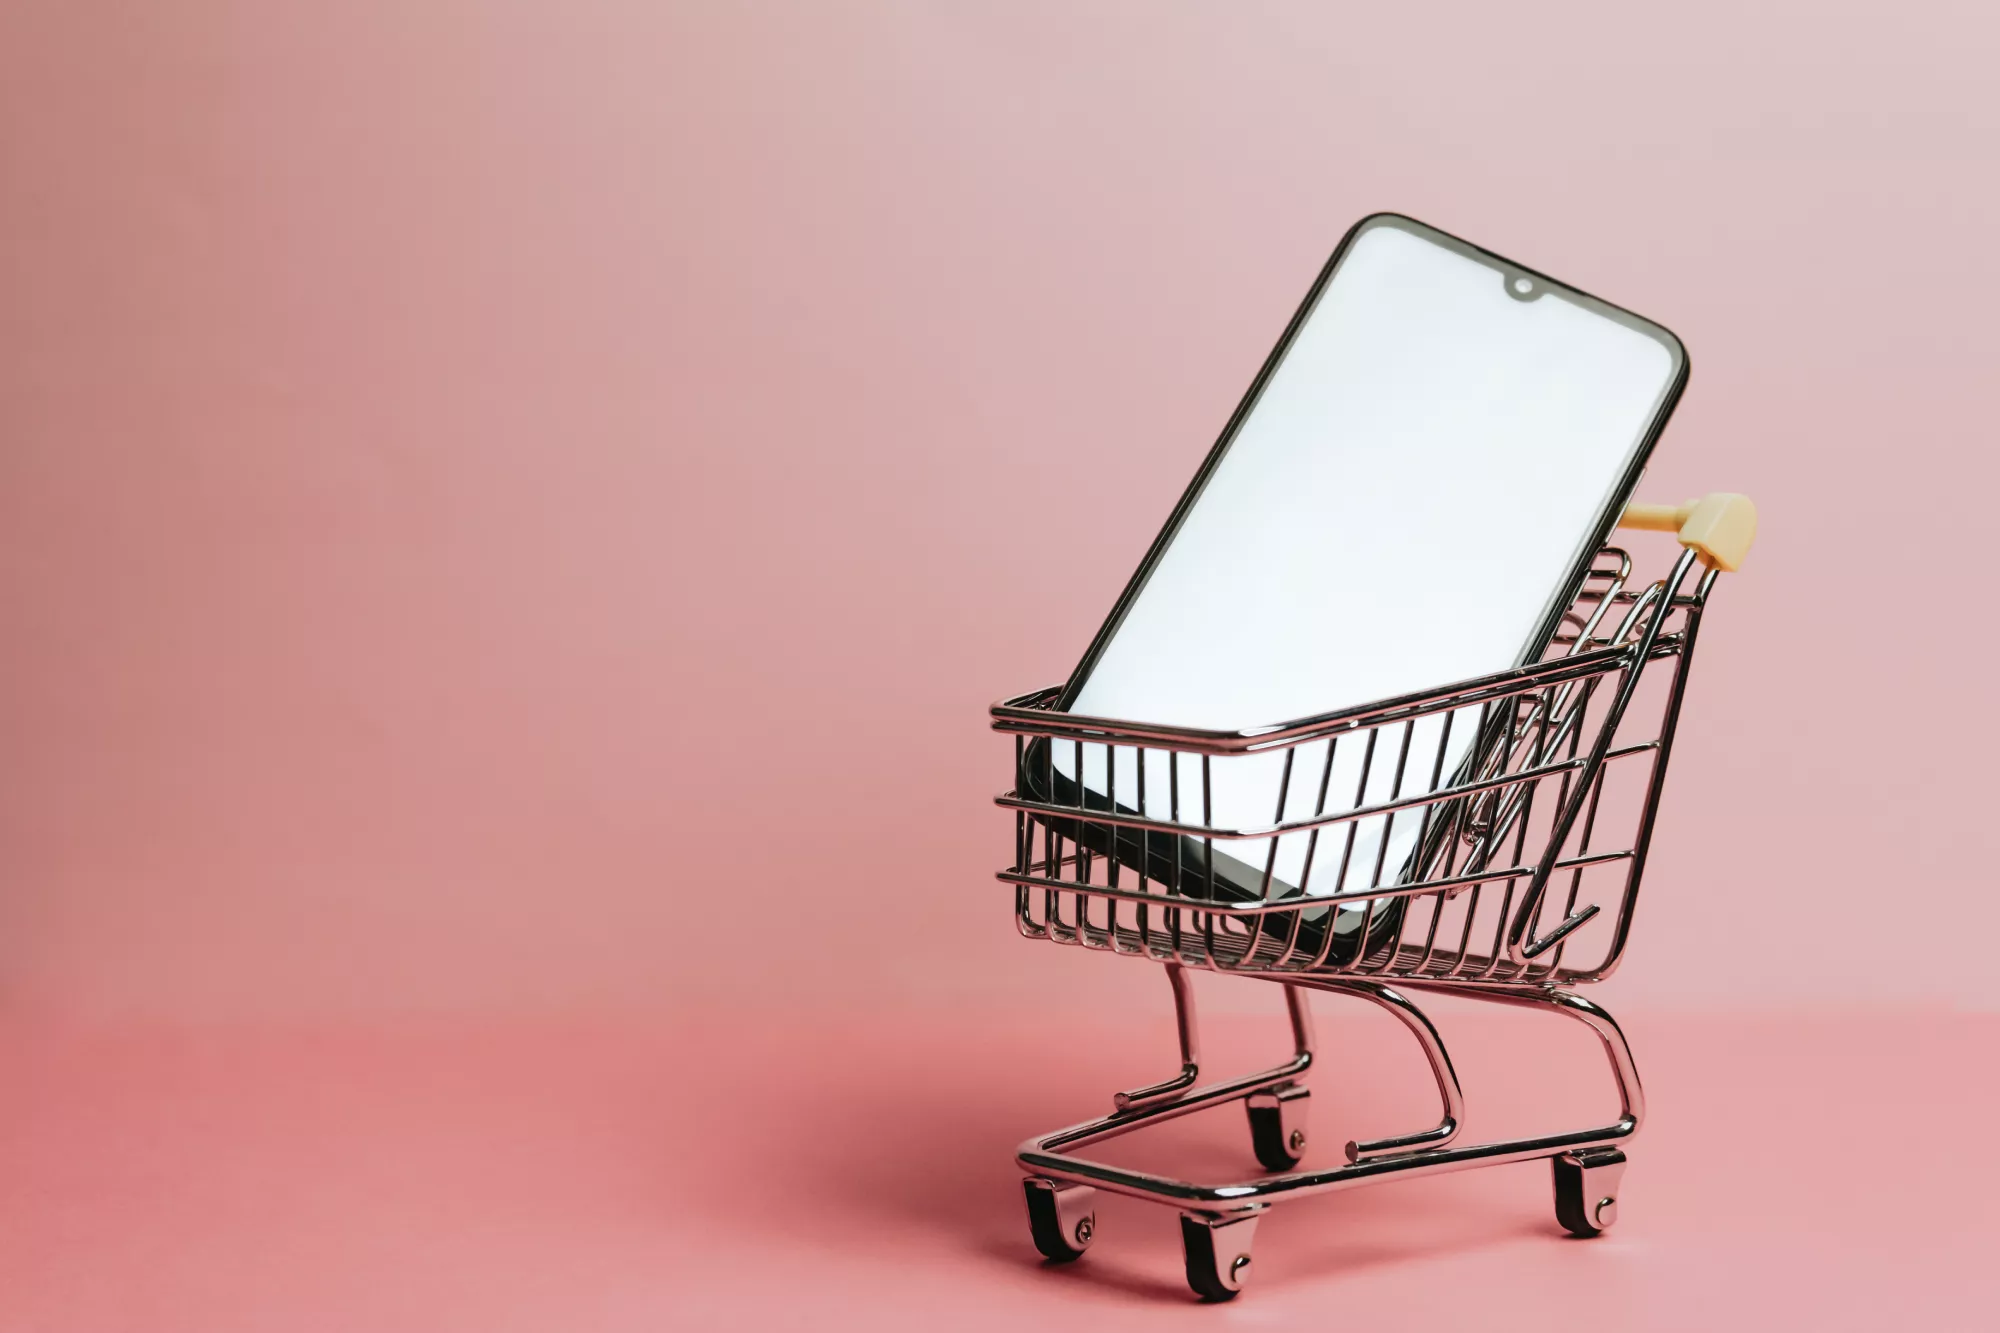 smartphone in shopping cart for starting an ecommerce business in 2023